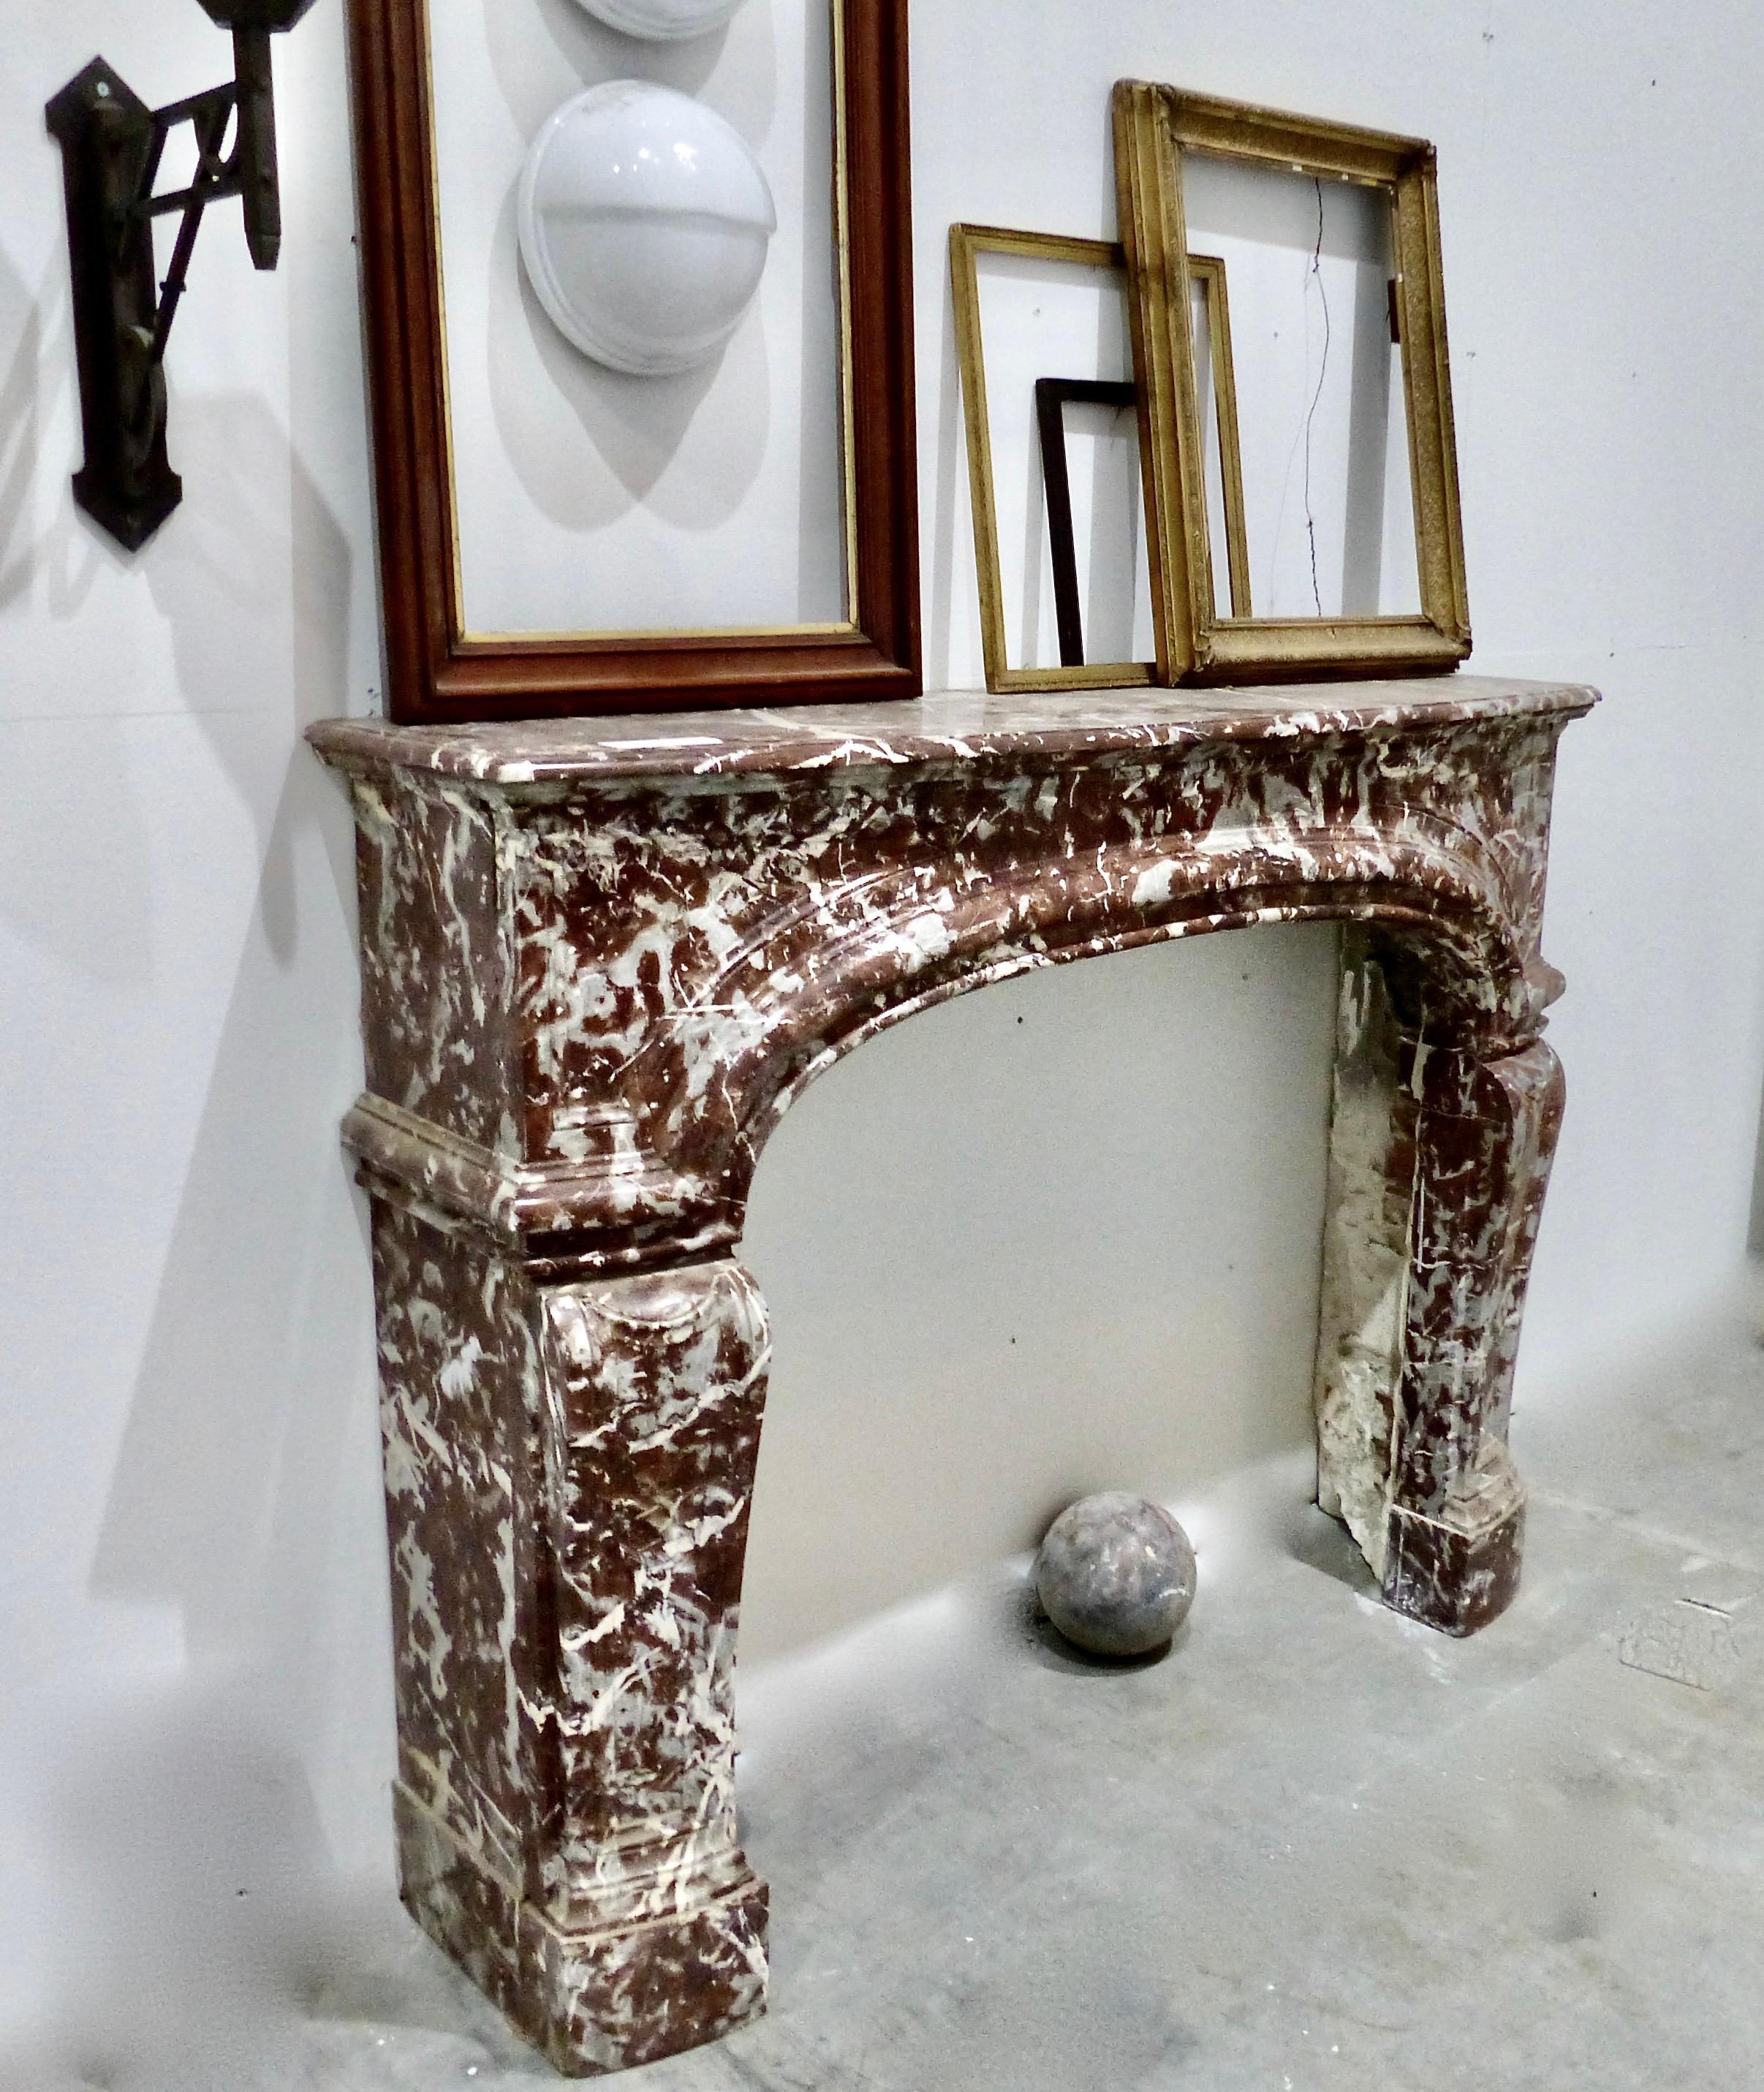 A handsome arched fireplace surround from Belgium. Extraordinary and rare antique marble with hand carved details throughout. Recently acquired from a private collection. Salvaged in Paris.
Dimensions: 48” x 60” W x 15” D
Interior dims 39